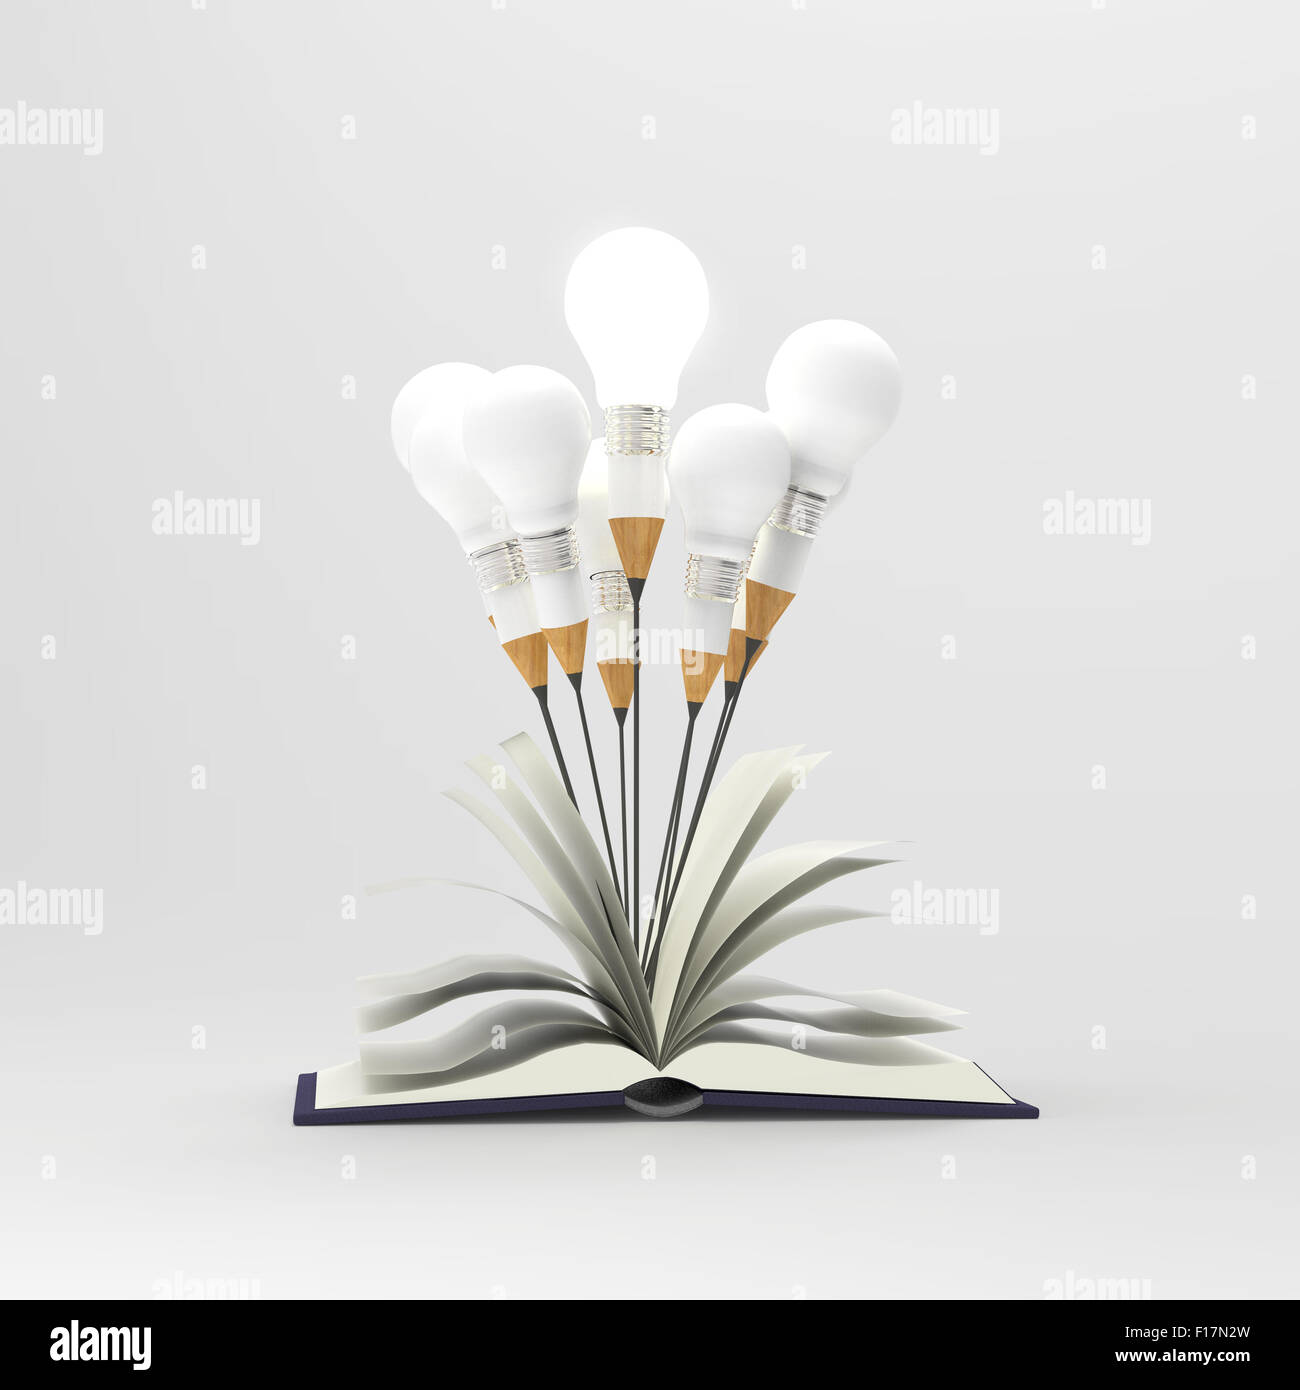 Creative Idea Concept. Light Bulb and Drawings of Clouds with Words on Grey  Background Stock Image - Image of leader, glowing: 247542453